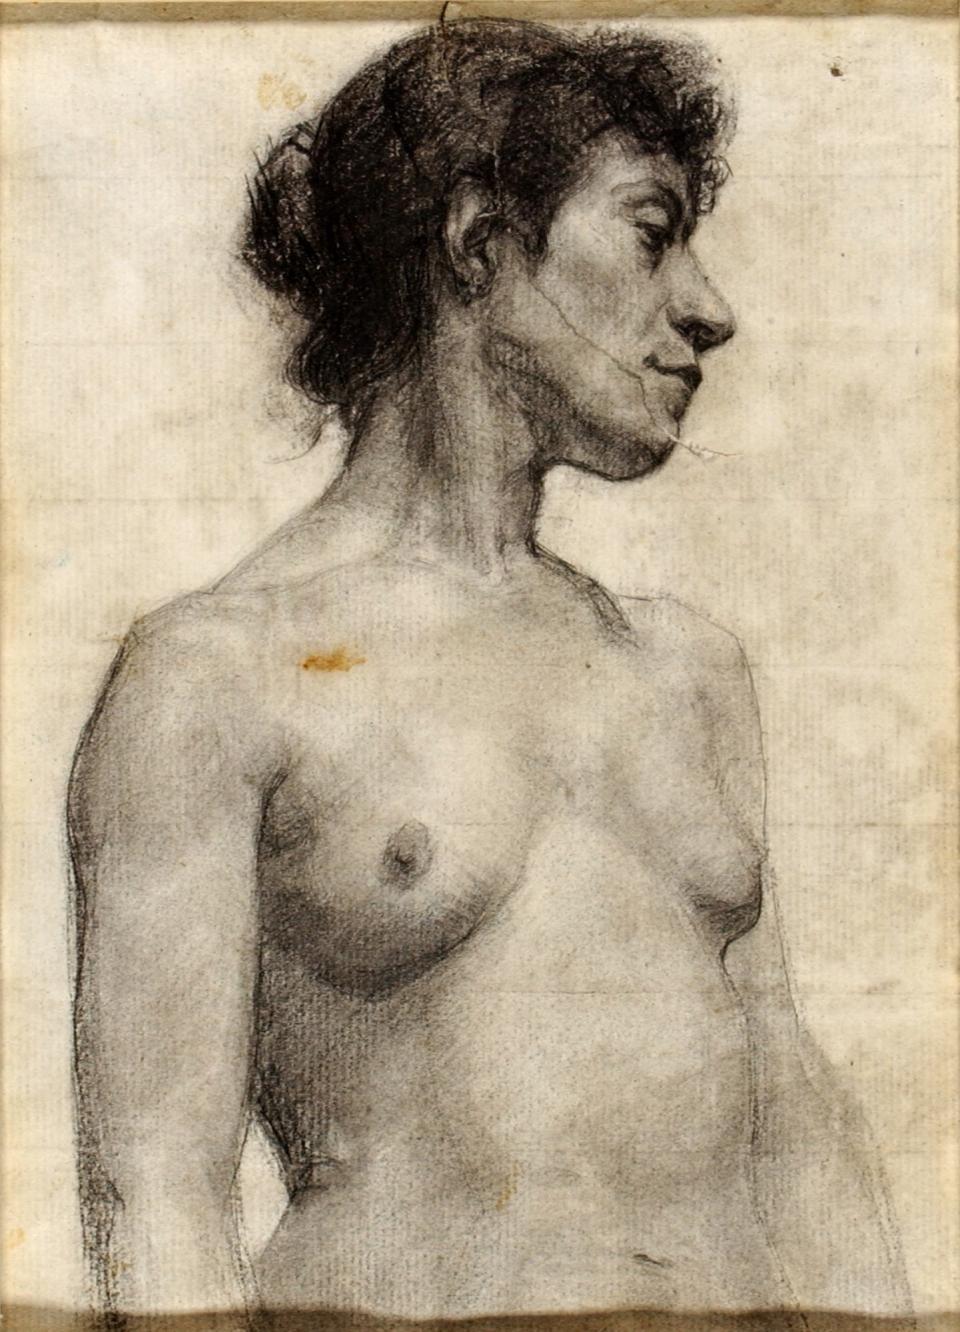 Nudist Fun Galleries - Nude: Study of a Young Girl | Smithsonian American Art Museum